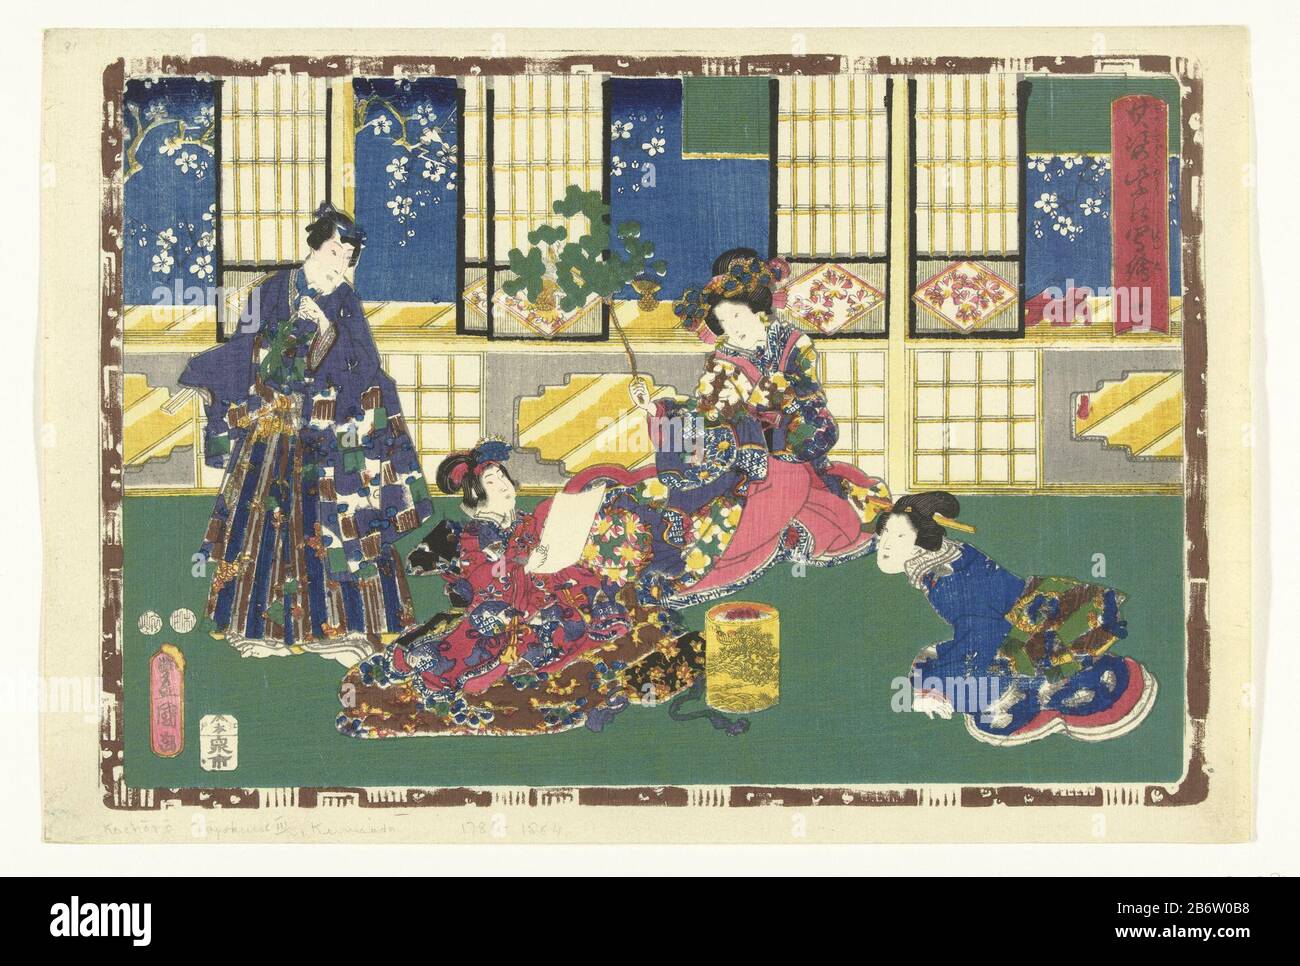 Hoofdstuk 31 Getrouwe afbeeldingen van de Schitterende Prins (serietitel) Sono sugata Hikaru no utsushi-e (serietitel op object) Prince Genji, an elegantly dressed woman and a maid, looking girl with paper in hand sitting on cushion with brazier; slid through the open walls overlooking white blossom against a blue background. Presentation surrounded by brown edge Where: in Genji emblemen. Manufacturer : printmaker: Kunisada (I), Utagawa (listed building) censor: Kinugasa Fusajiro (listed building) censor: Murata Heiemon (listed building) publisher: Izumiya Ichibei (Chance Endo ) (listed buildi Stock Photo